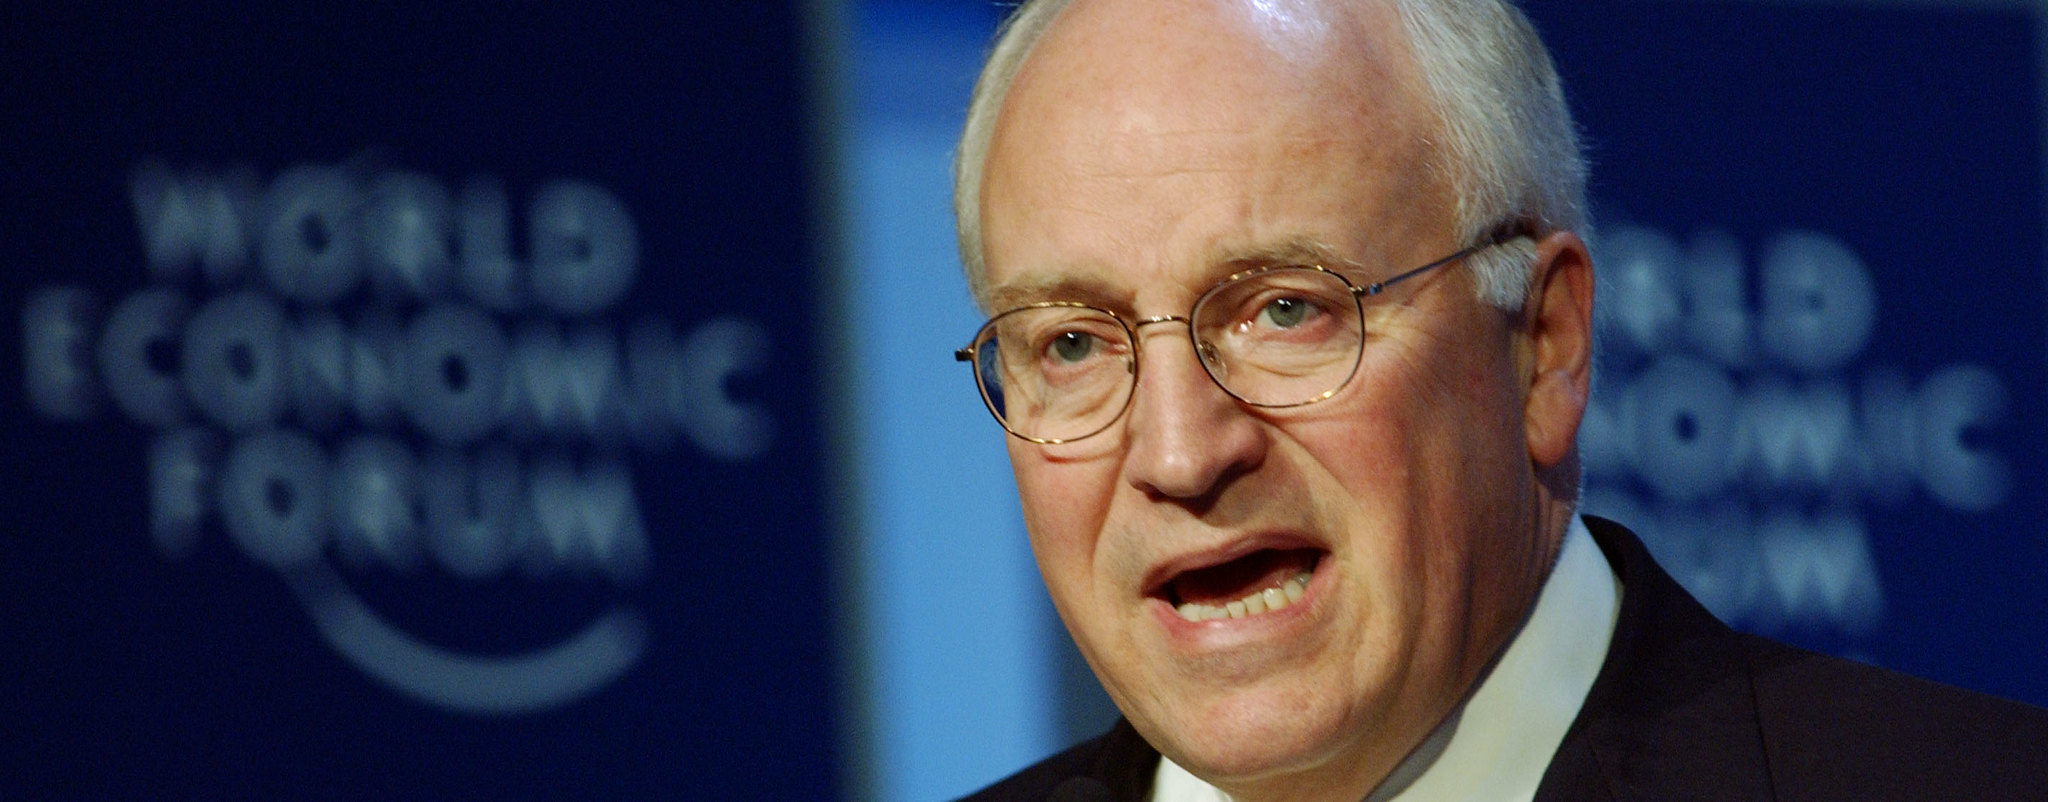 Dick cheney foreign policy